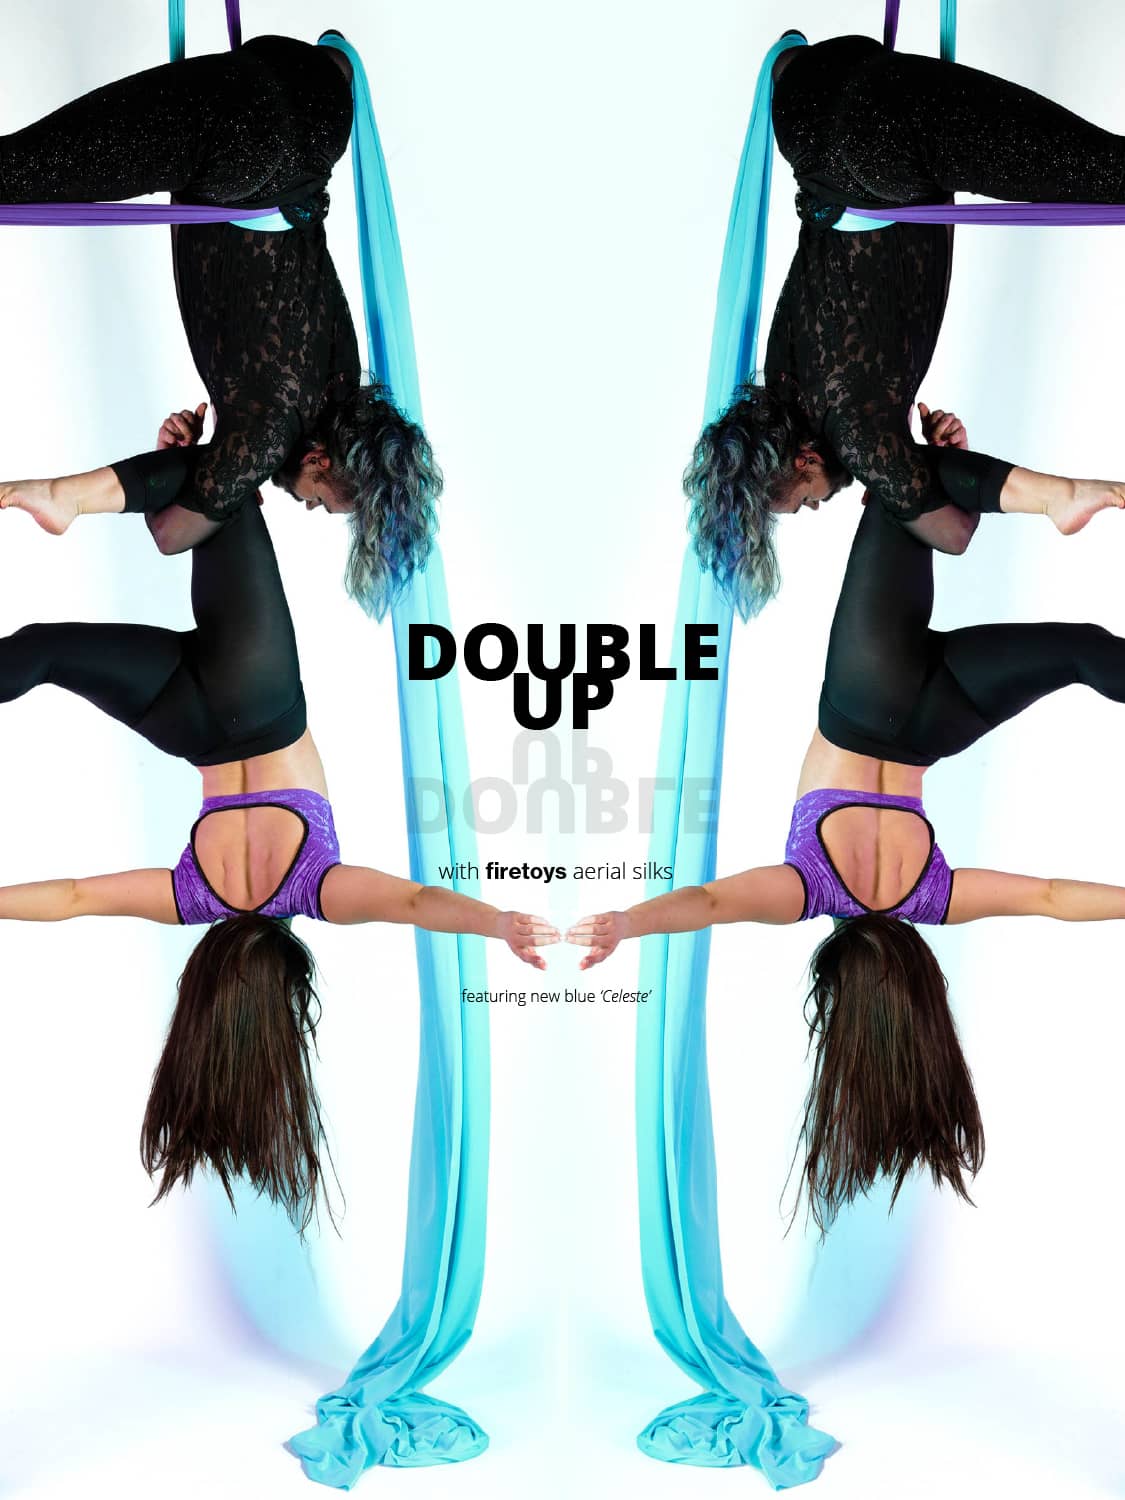 2 performers on double light blue and purple aerial silks mirrored